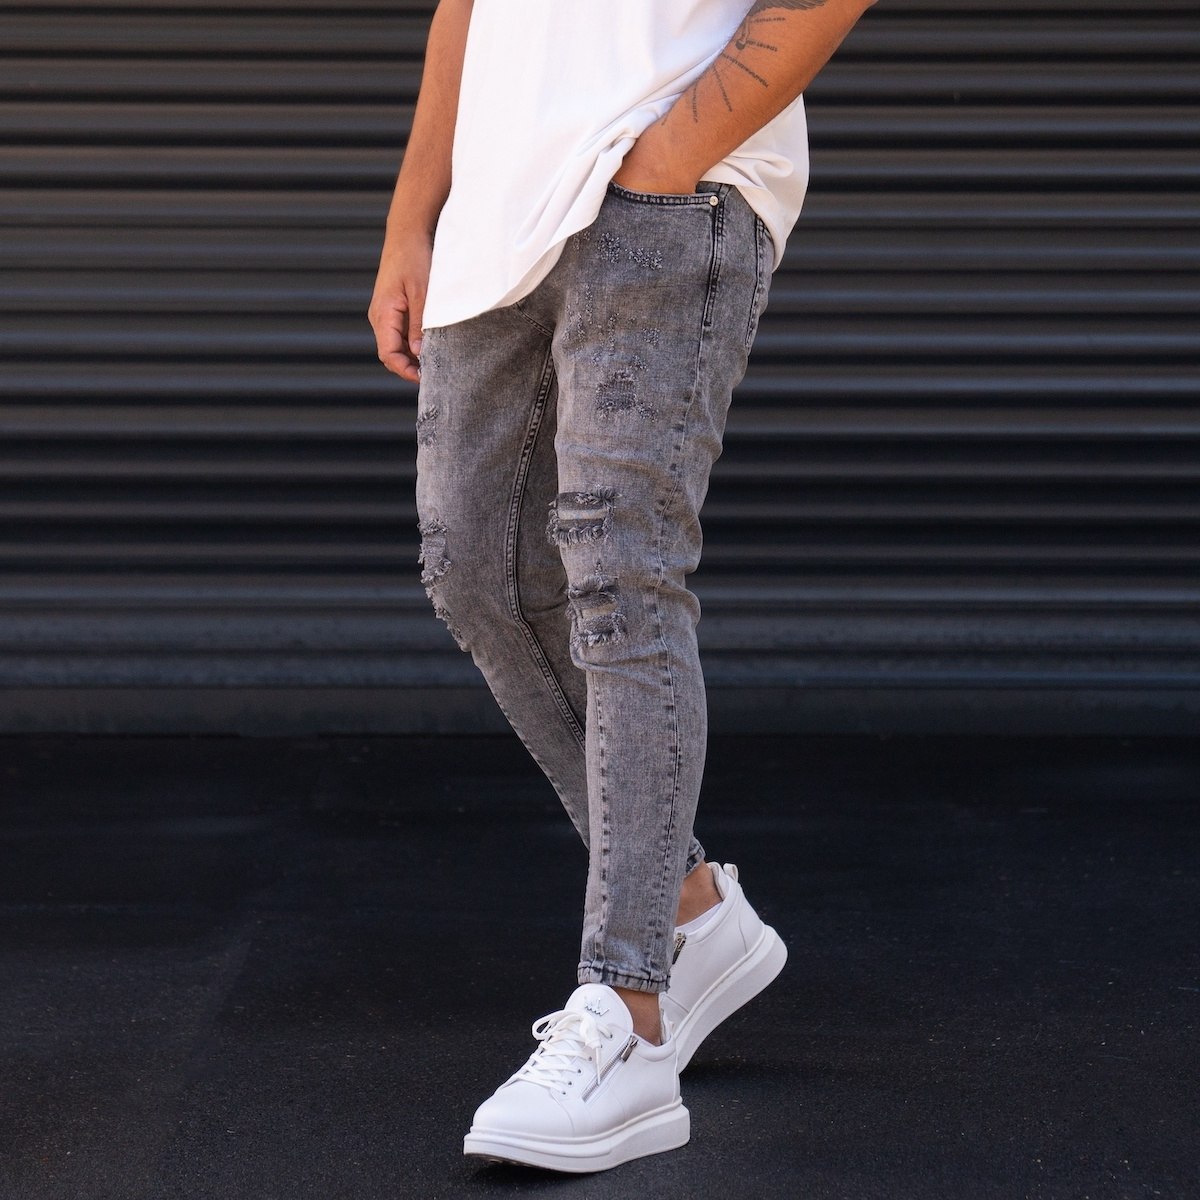 Black Long Lasting Fashionable Men's Wear Ripped Jeans Super Skinny Slim  Fit Denim Pants at Best Price in Chandigarh | Fashion Plaza